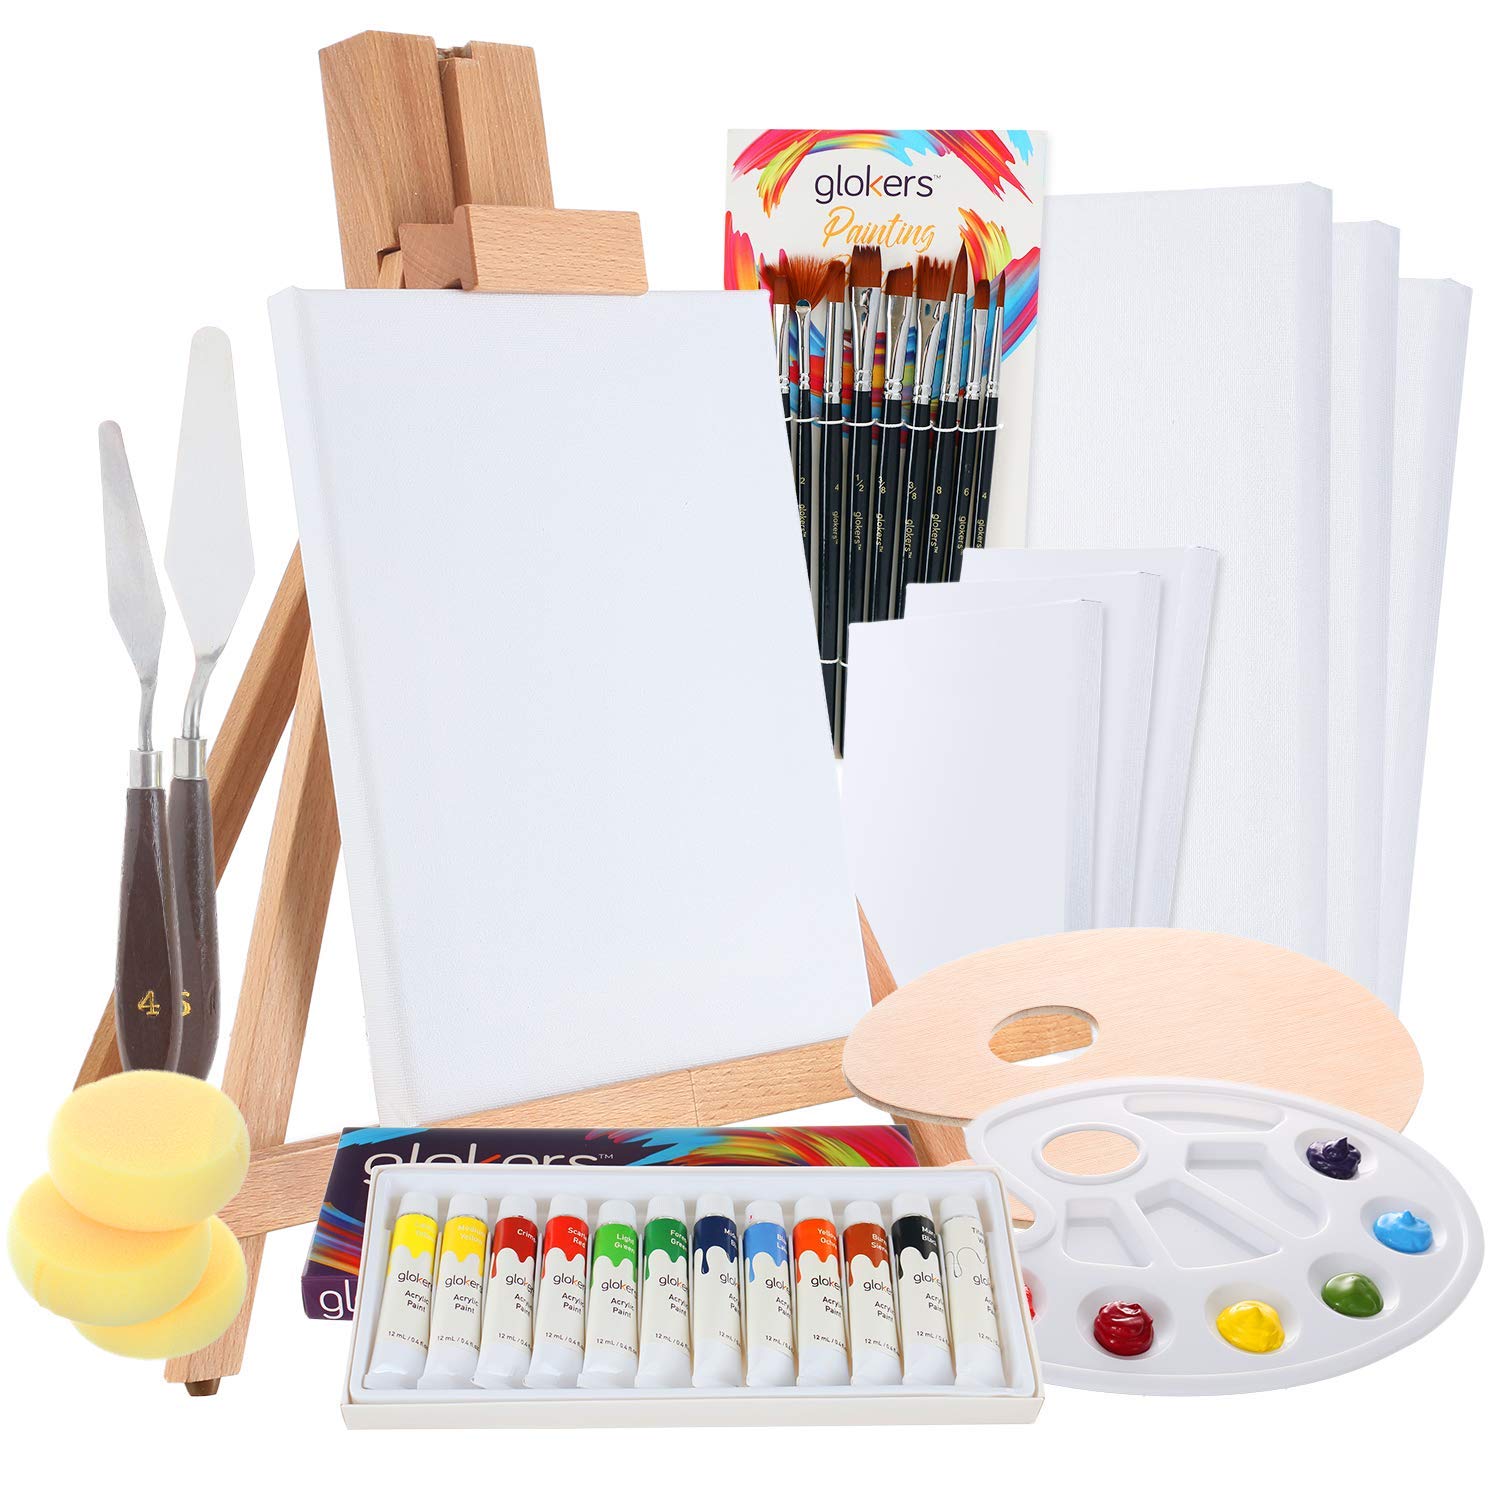 Complete Acrylic Paint Set 36 Piece Professional Painting Set Includes Mini Easel, 6 Canvas, Paint Tray, Painting Knives, 10 Paintbrushes and More